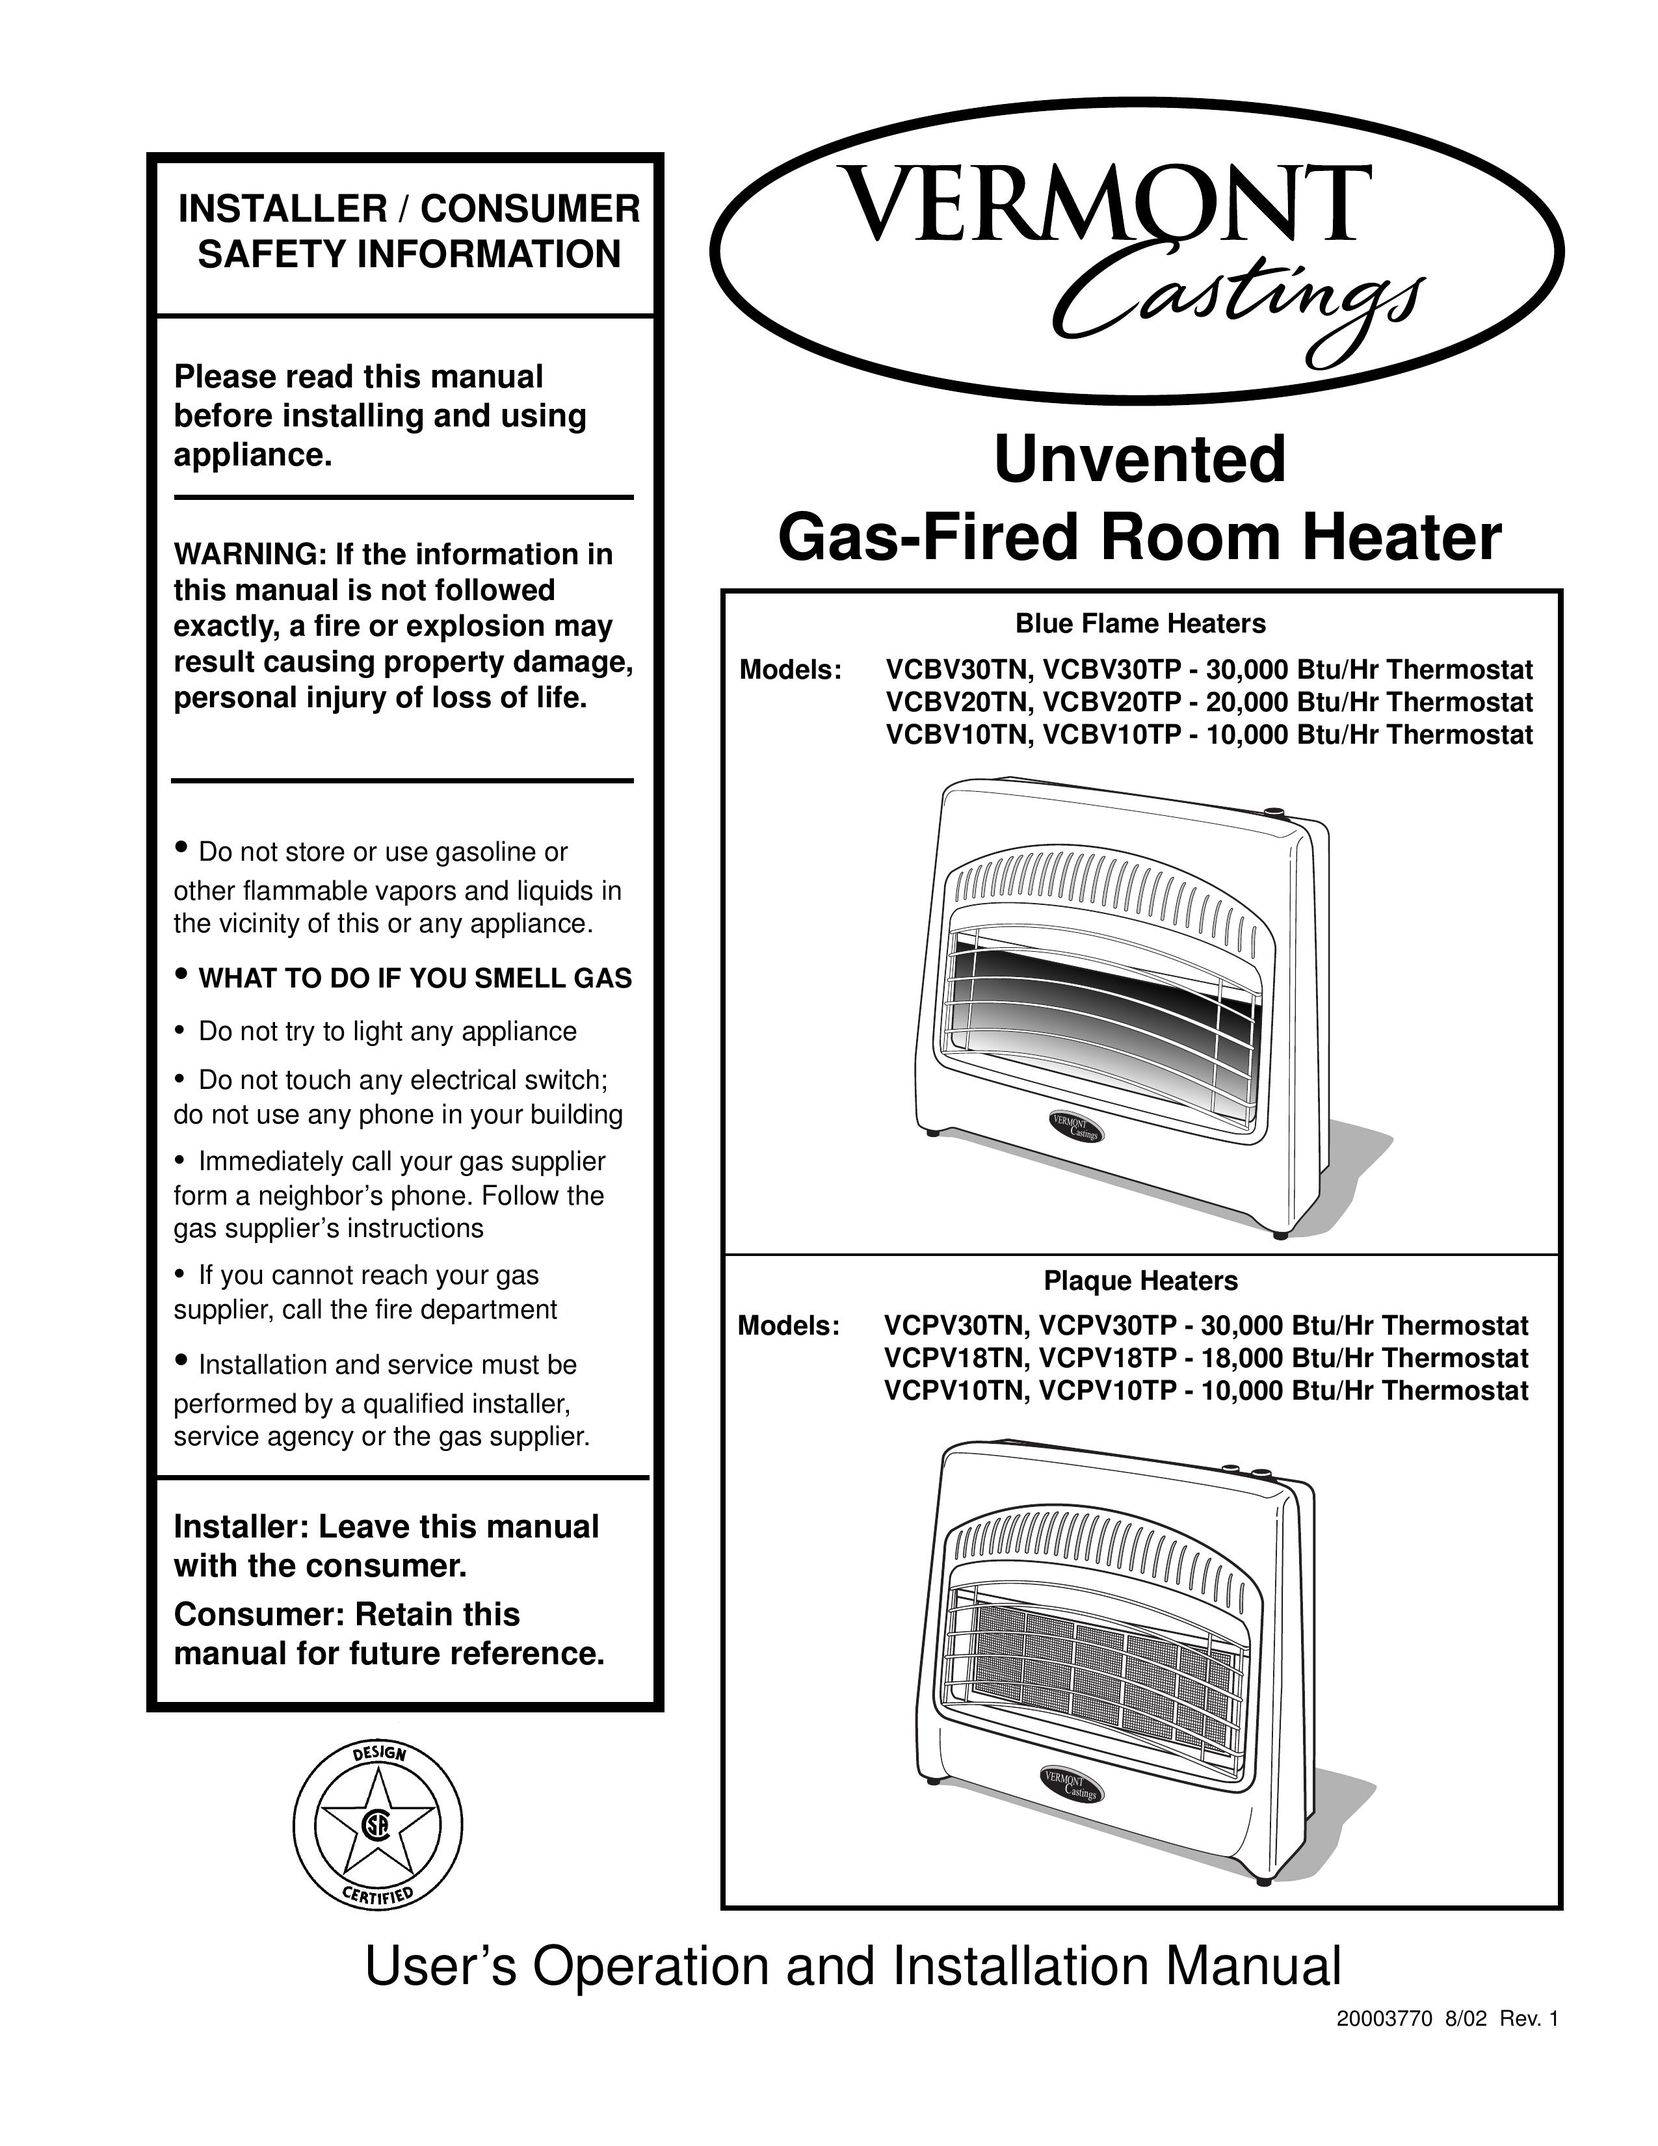 Vermont Casting VCBV10TP - 10 Gas Heater User Manual